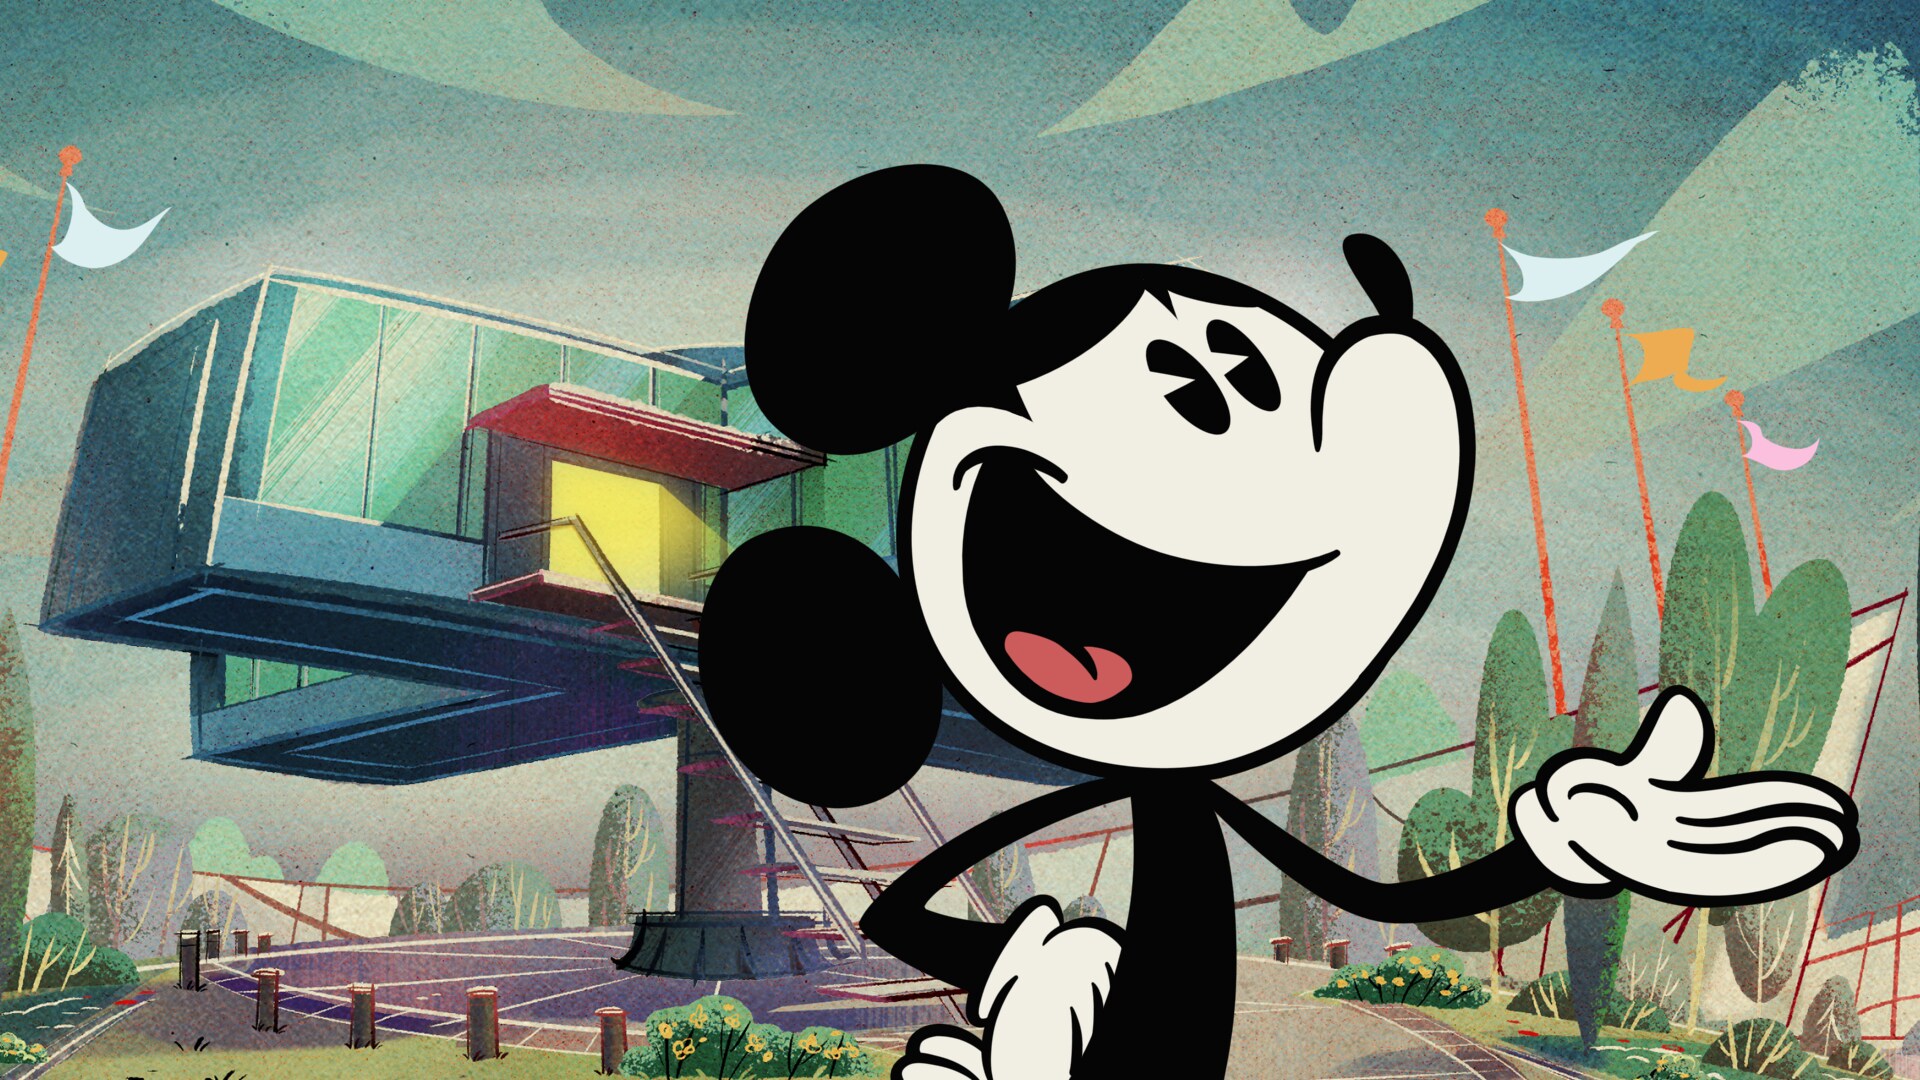 THE WONDERFUL WORLD OF MICKEY MOUSE - "House of Tomorrow" - Mickey, Donald, and Goofy experience tomorrow's technology today when they sneak into Professor Von Drake's latest invention. (Disney+) MICKEY MOUSE